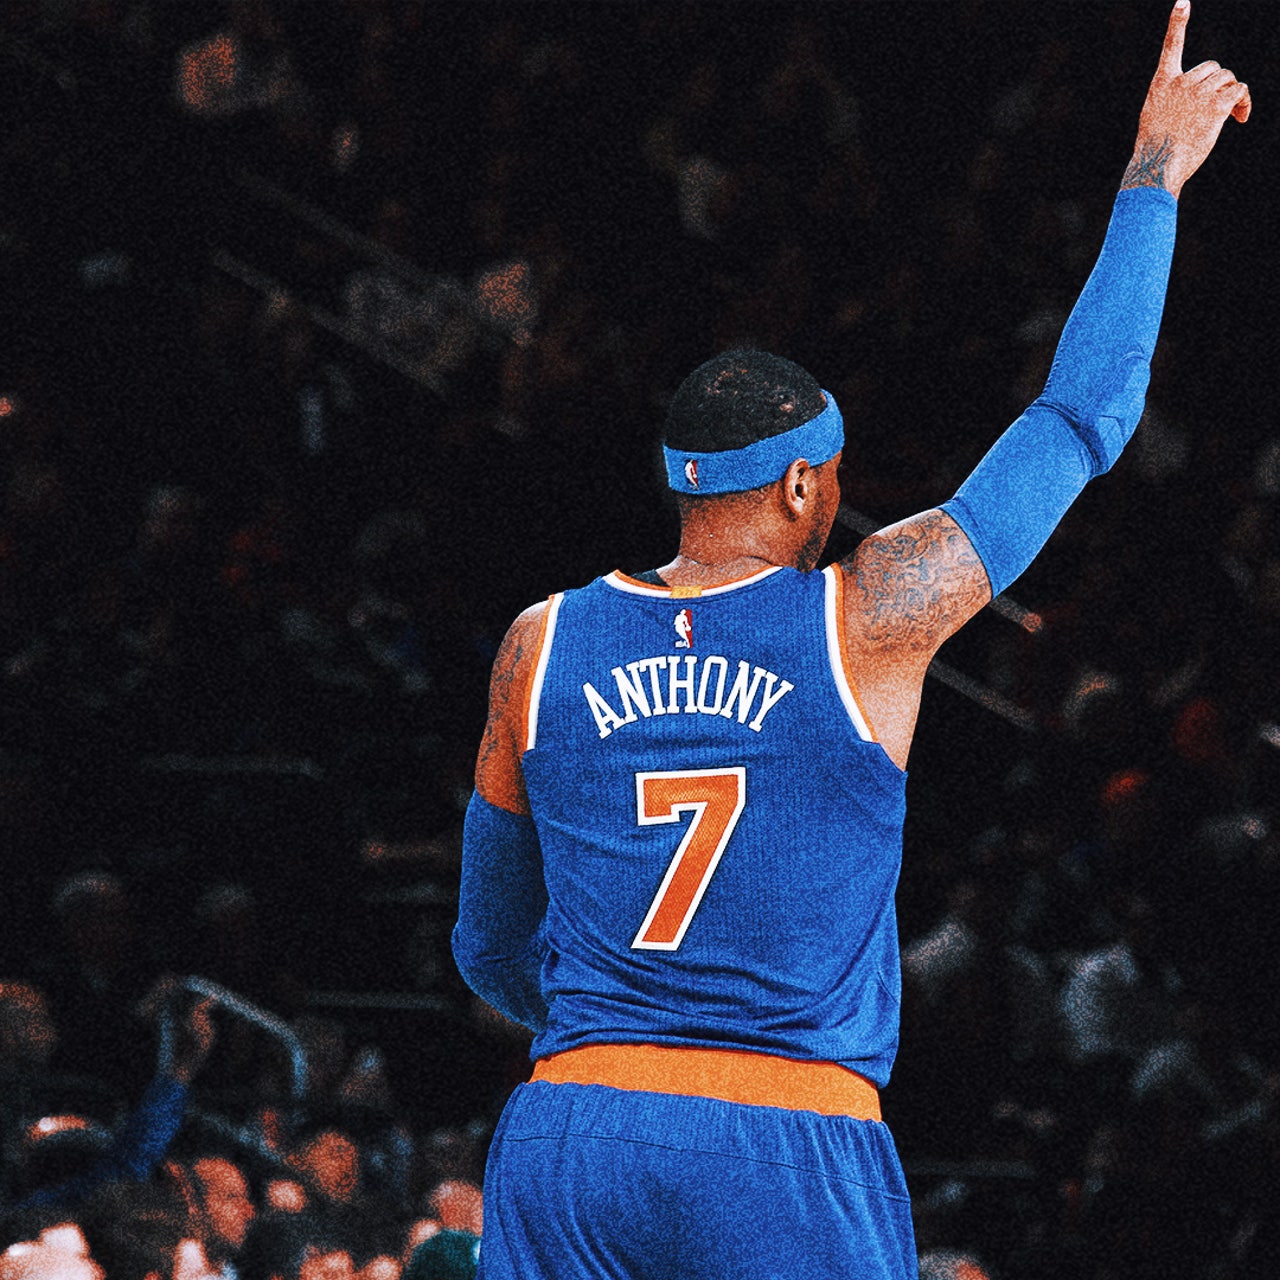 Carmelo Anthony retires from NBA, after 19-year career, NCAA title, 3  Olympic gold medals